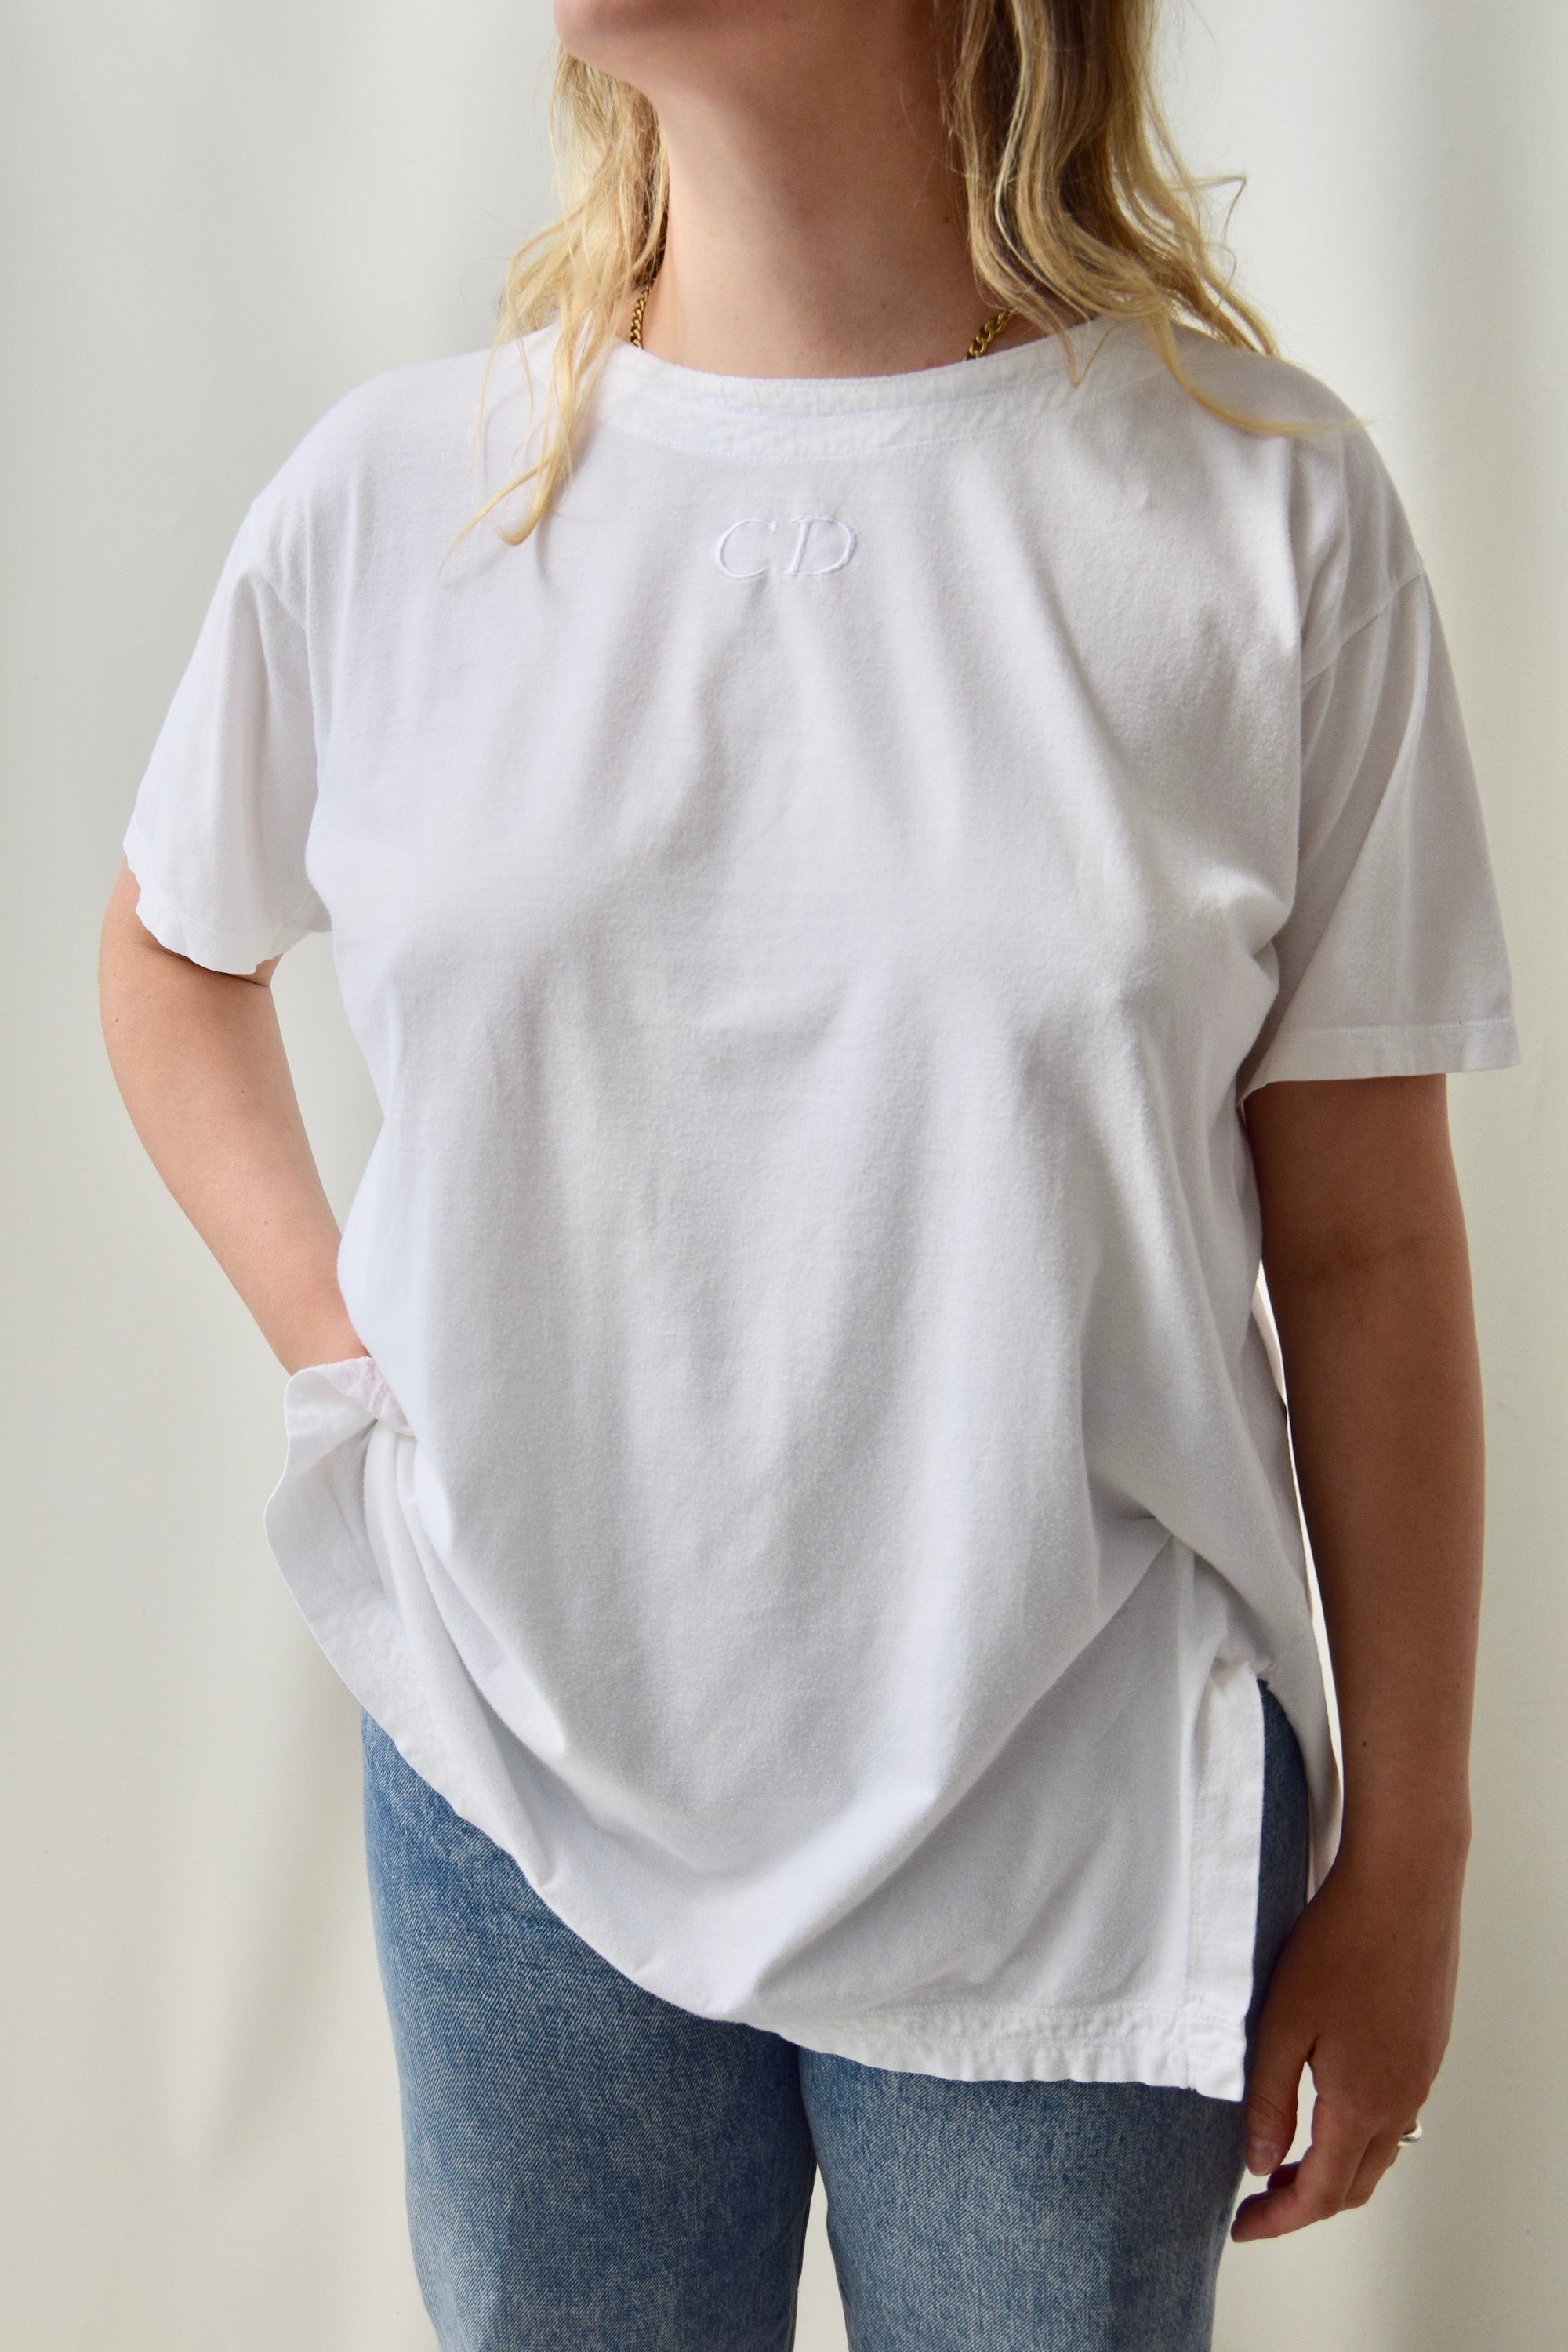 White Cotton Embroidered "Christian Dior" T-Shirt